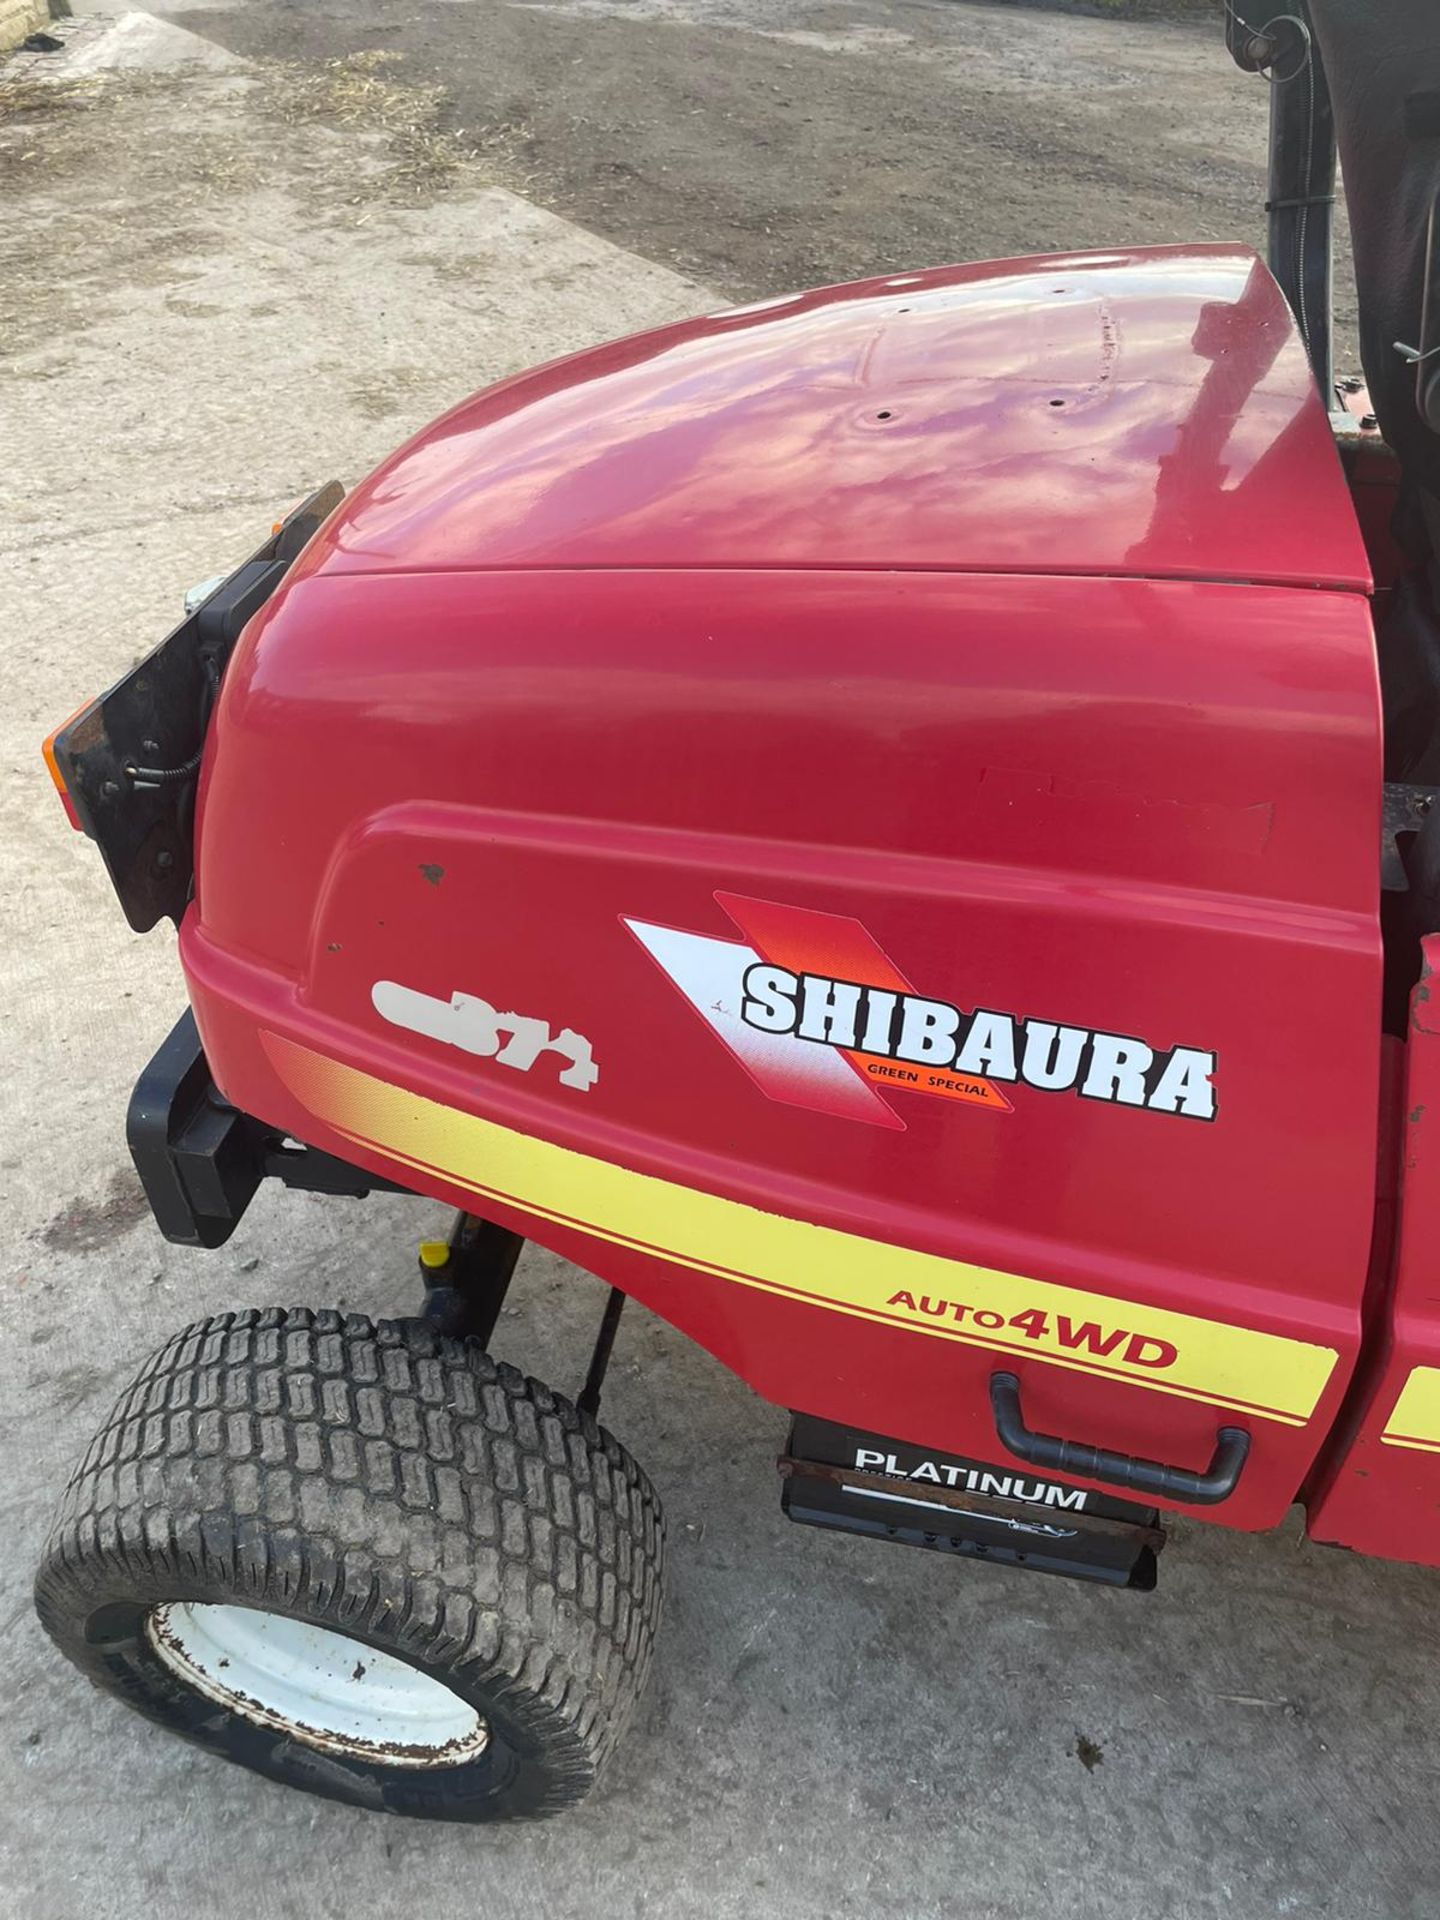 2012 SHIBAURA CM374 OUTFRONT RIDE ON MOWER, RUNS, DRIVES AND CUTS, IN USED BUT GOOD CONDITION - Image 4 of 12